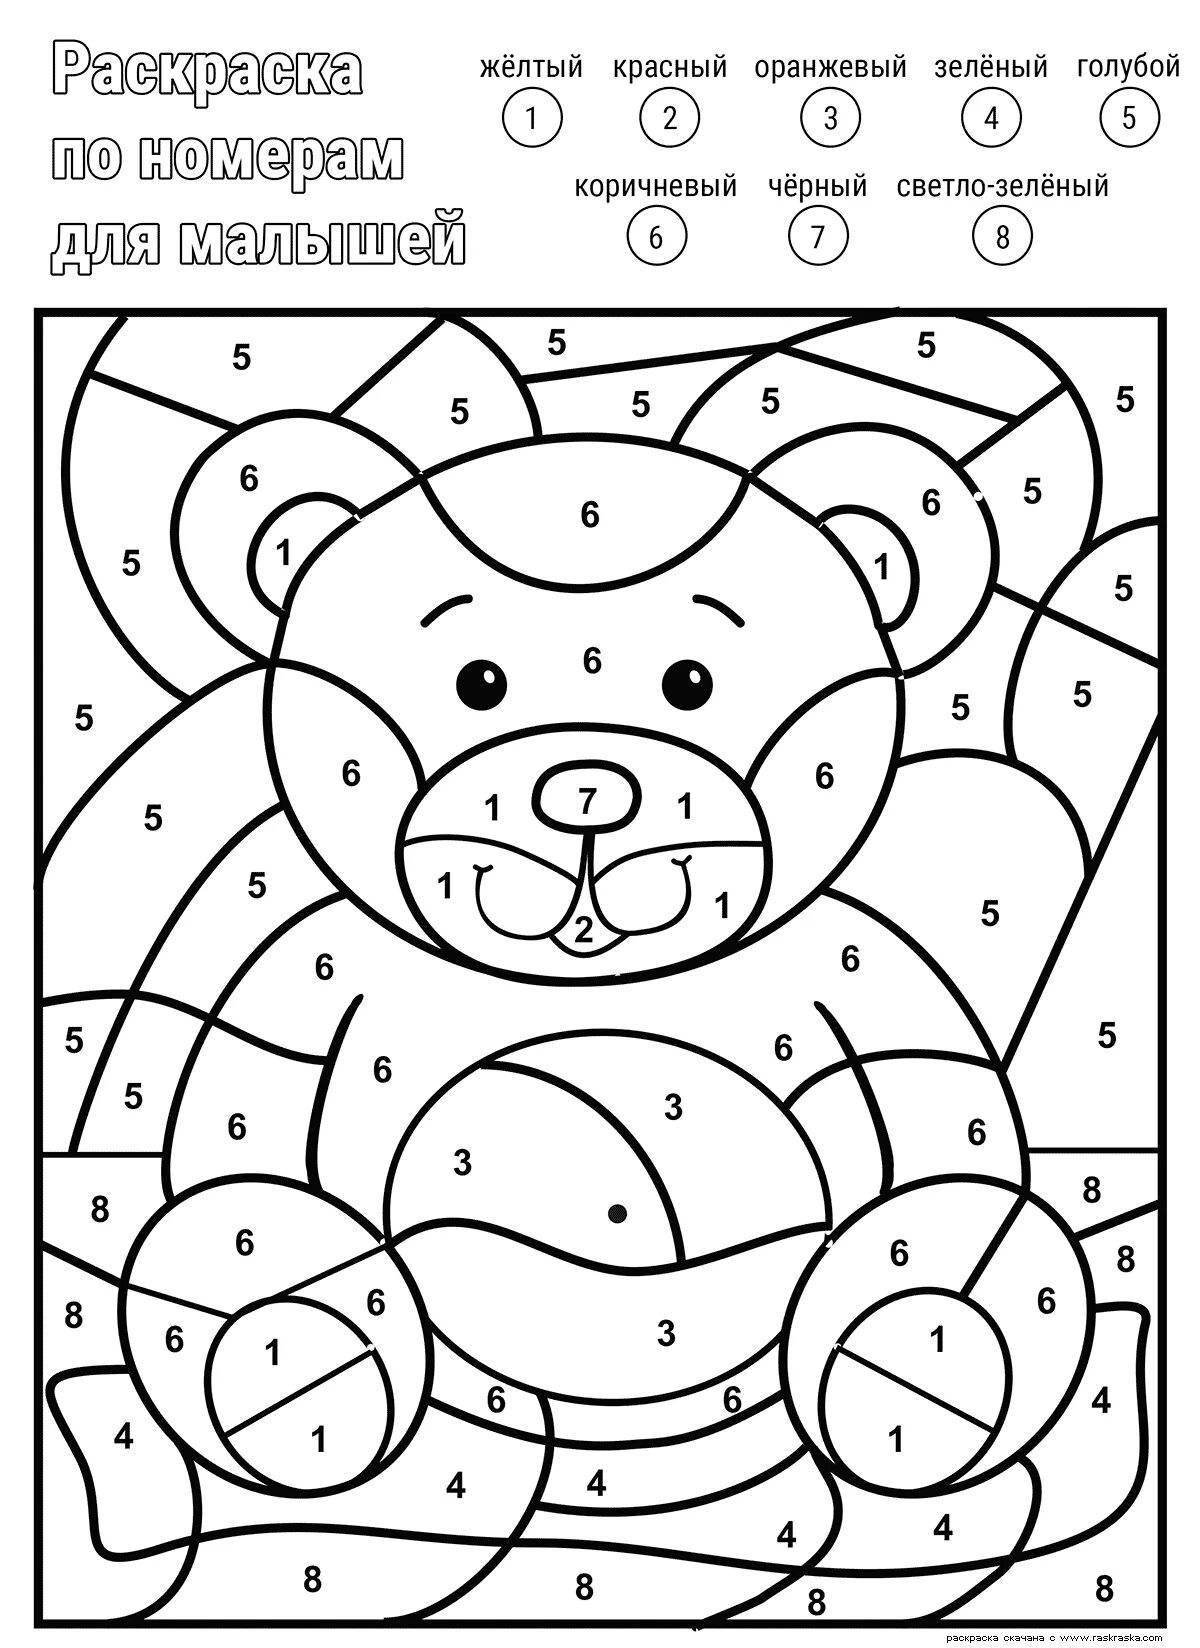 Fun coloring by numbers on your phone